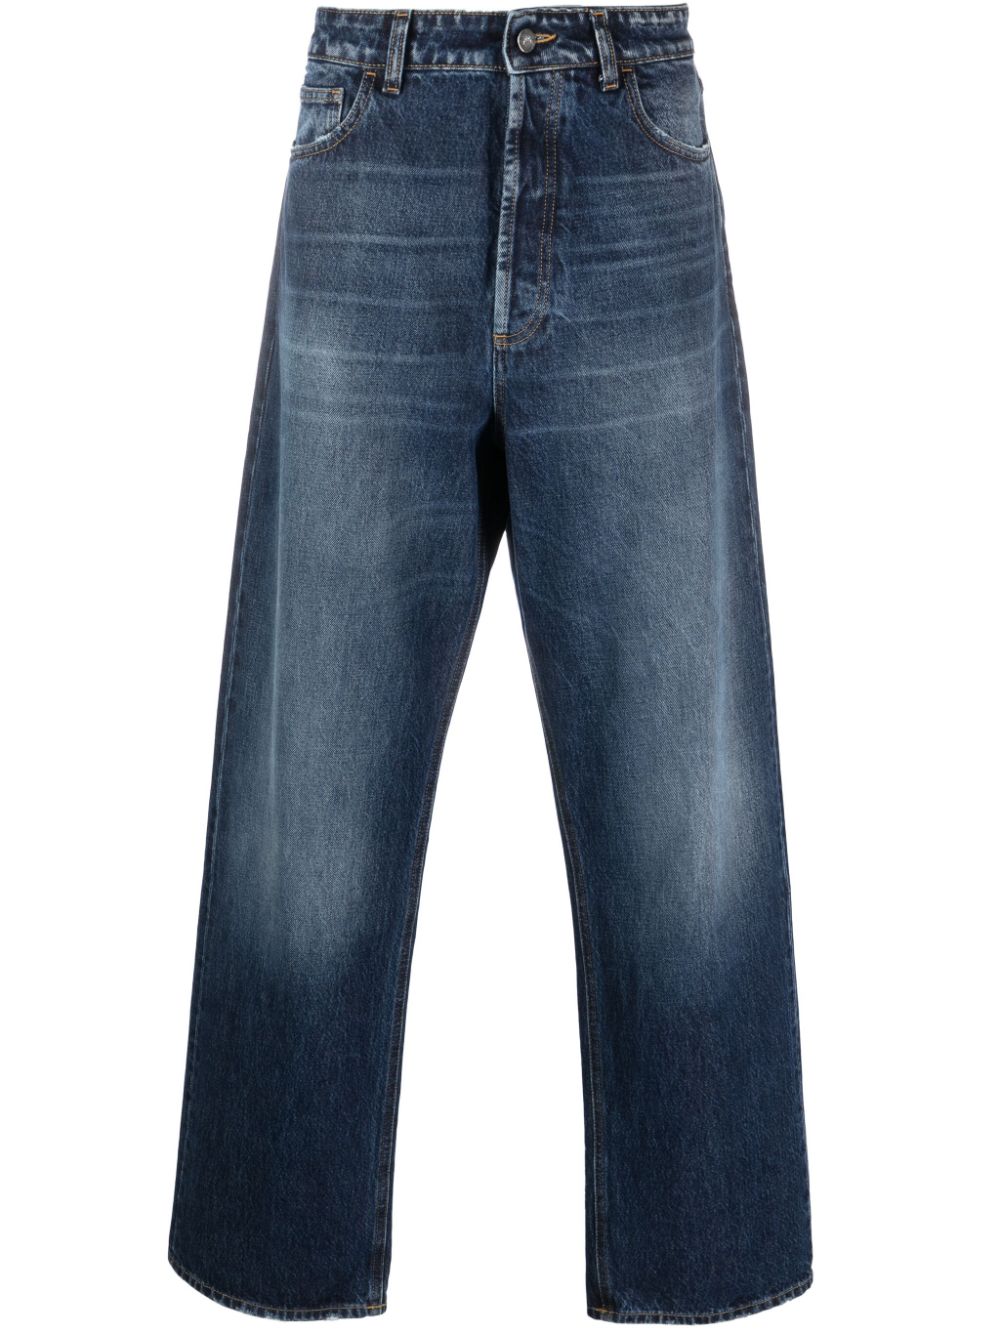 A-COLD-WALL* vintage-wash wide-leg jeans - Blue von A-COLD-WALL*